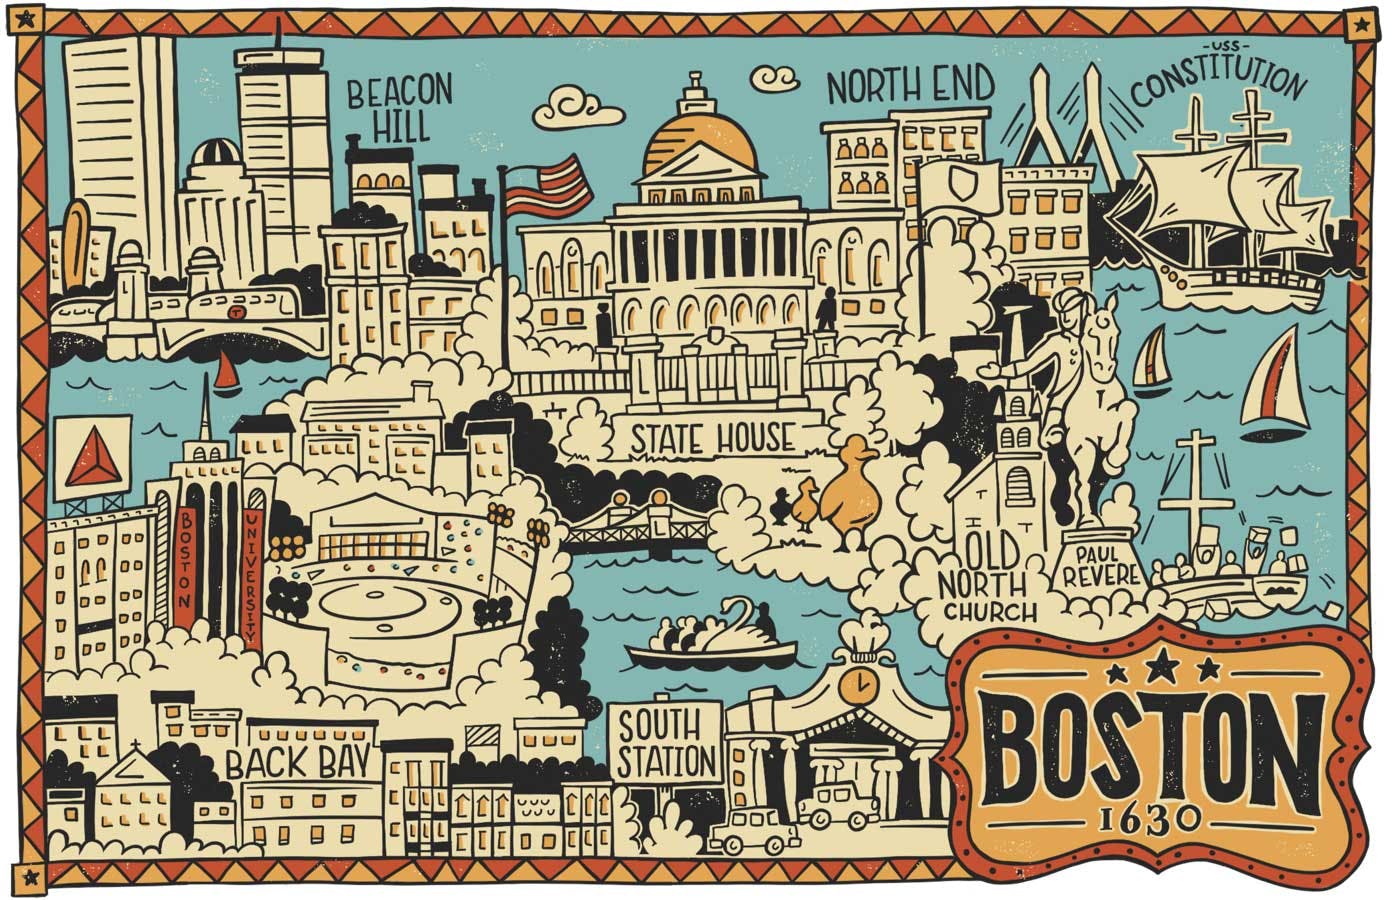 boston, ma events & things to do | eventbrite